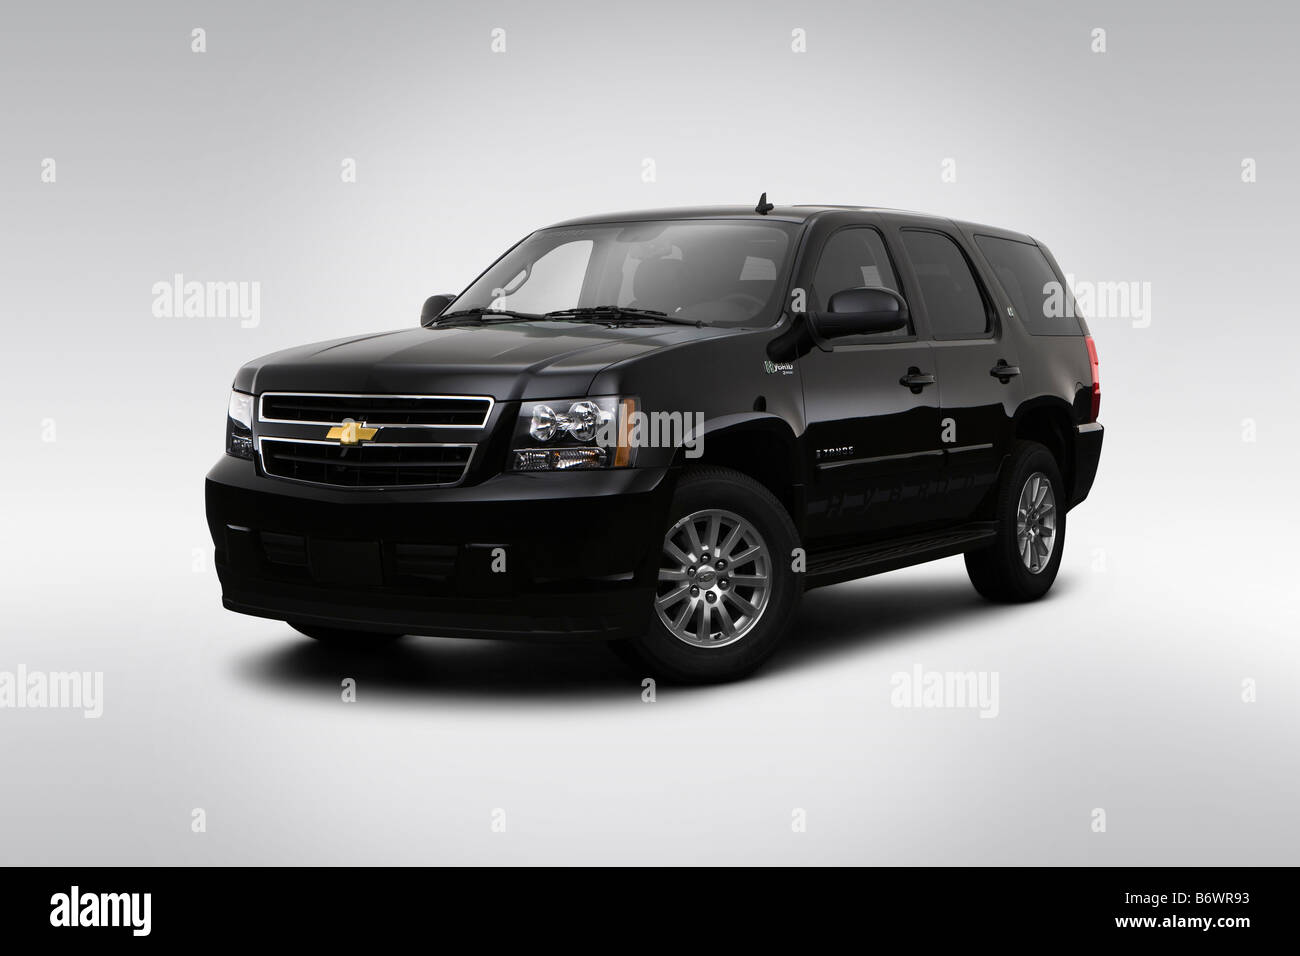 2009 Chevrolet Tahoe Hybrid in Black - Front angle view Stock Photo - Alamy